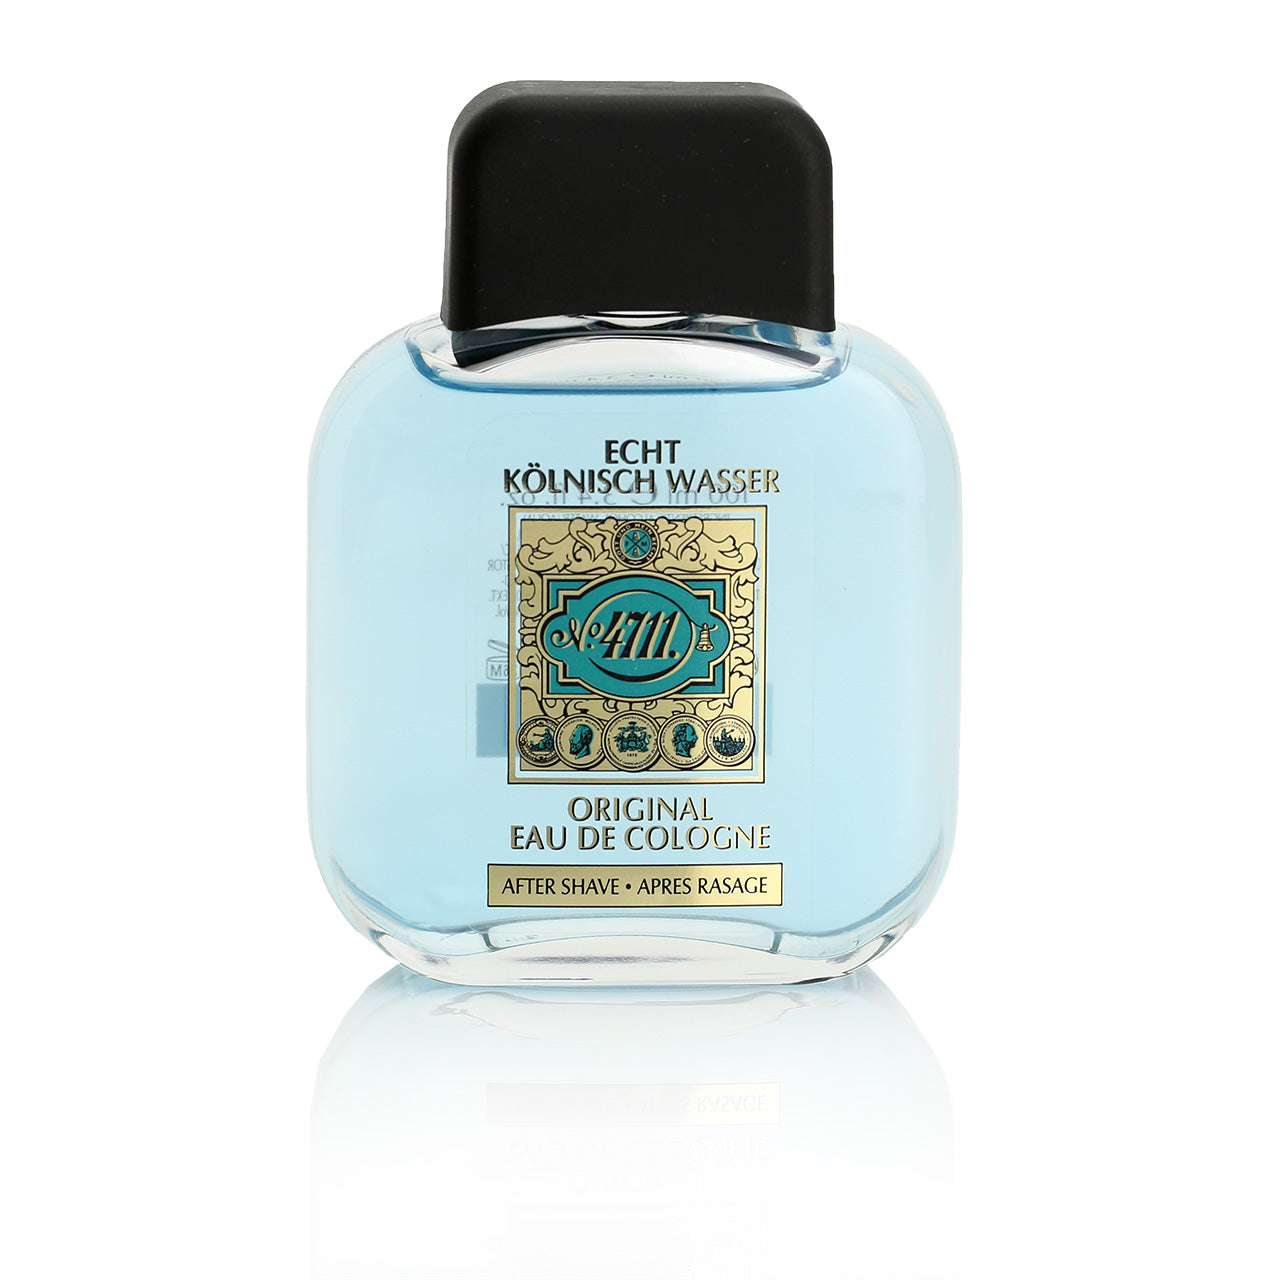 4711 classic bottle with gold and aqua label printed on the glass. 